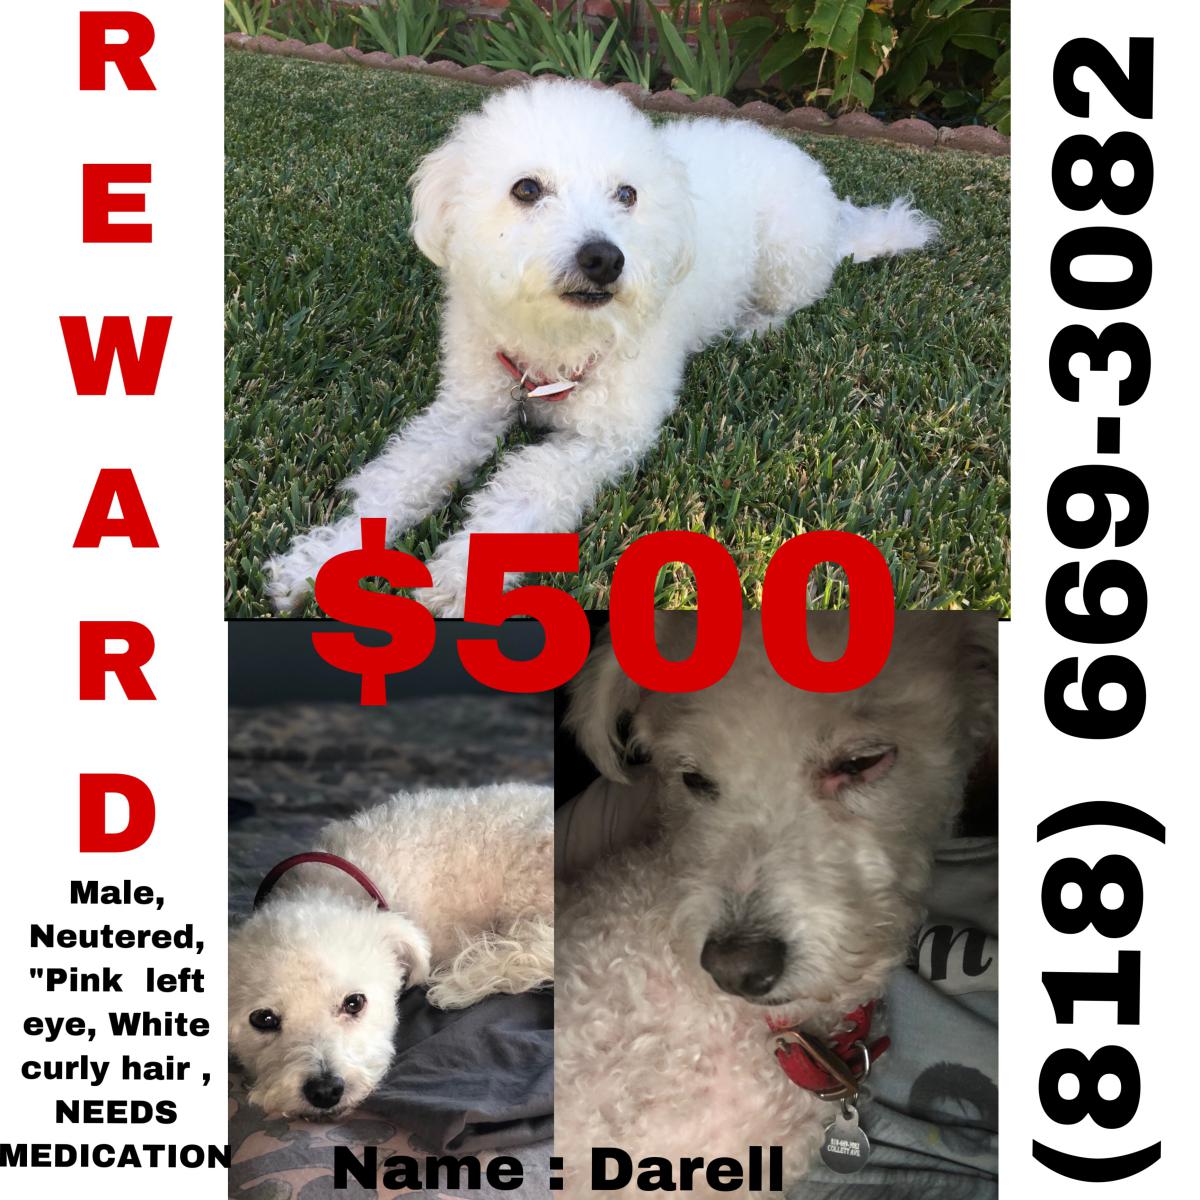 Image of Darell, Lost Dog